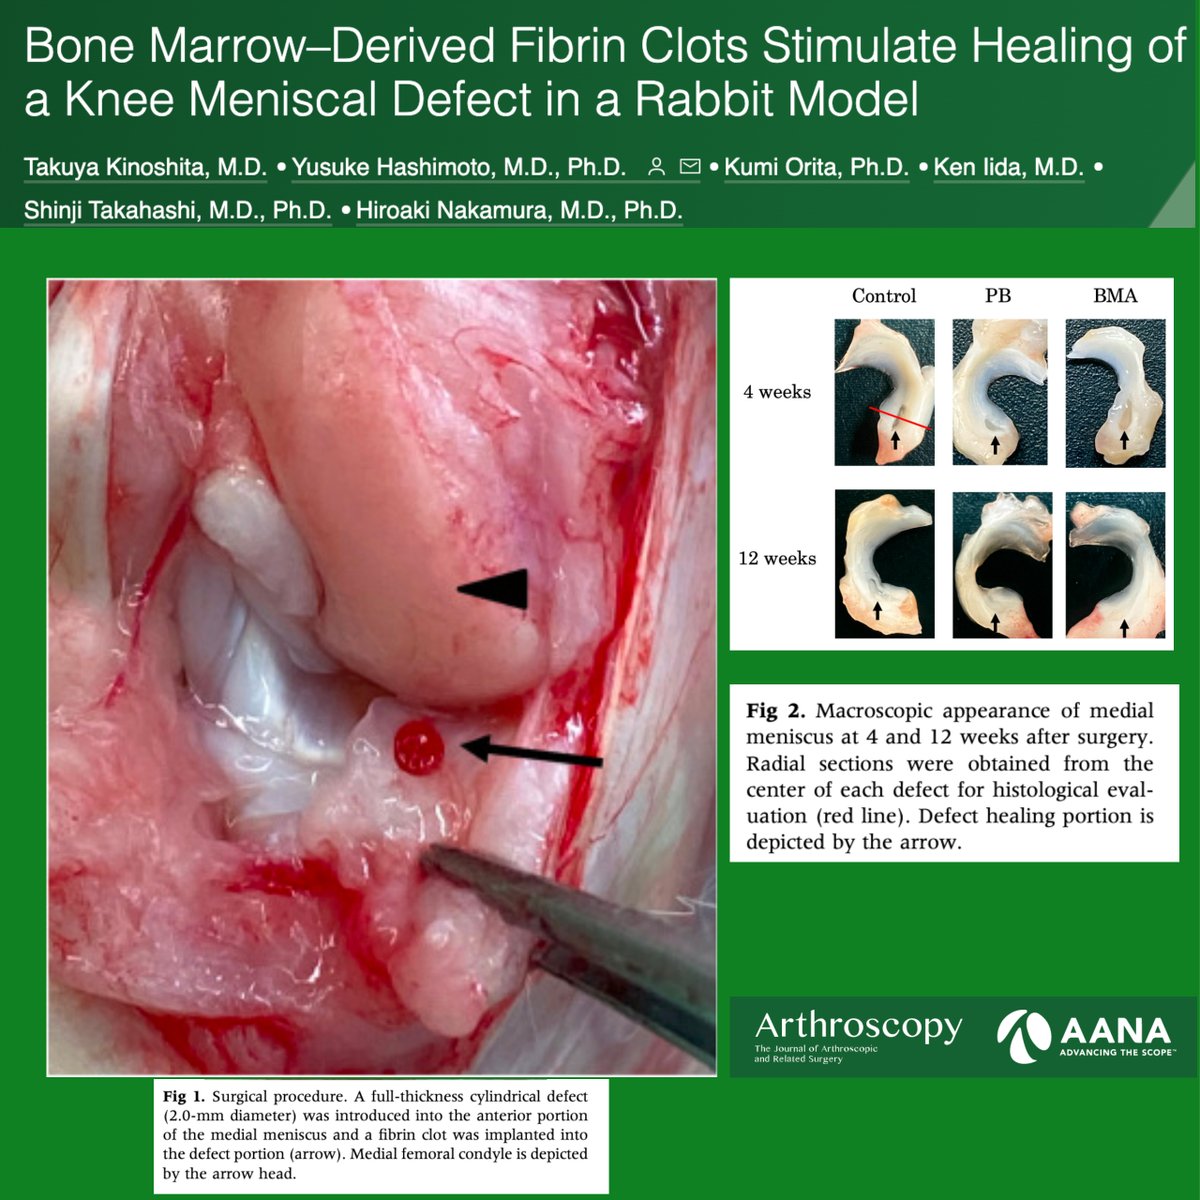 Bone marrow-derived fibrin clots stimulate healing of a meniscal defect in a rabbit model

ow.ly/wPGt50OMrtX